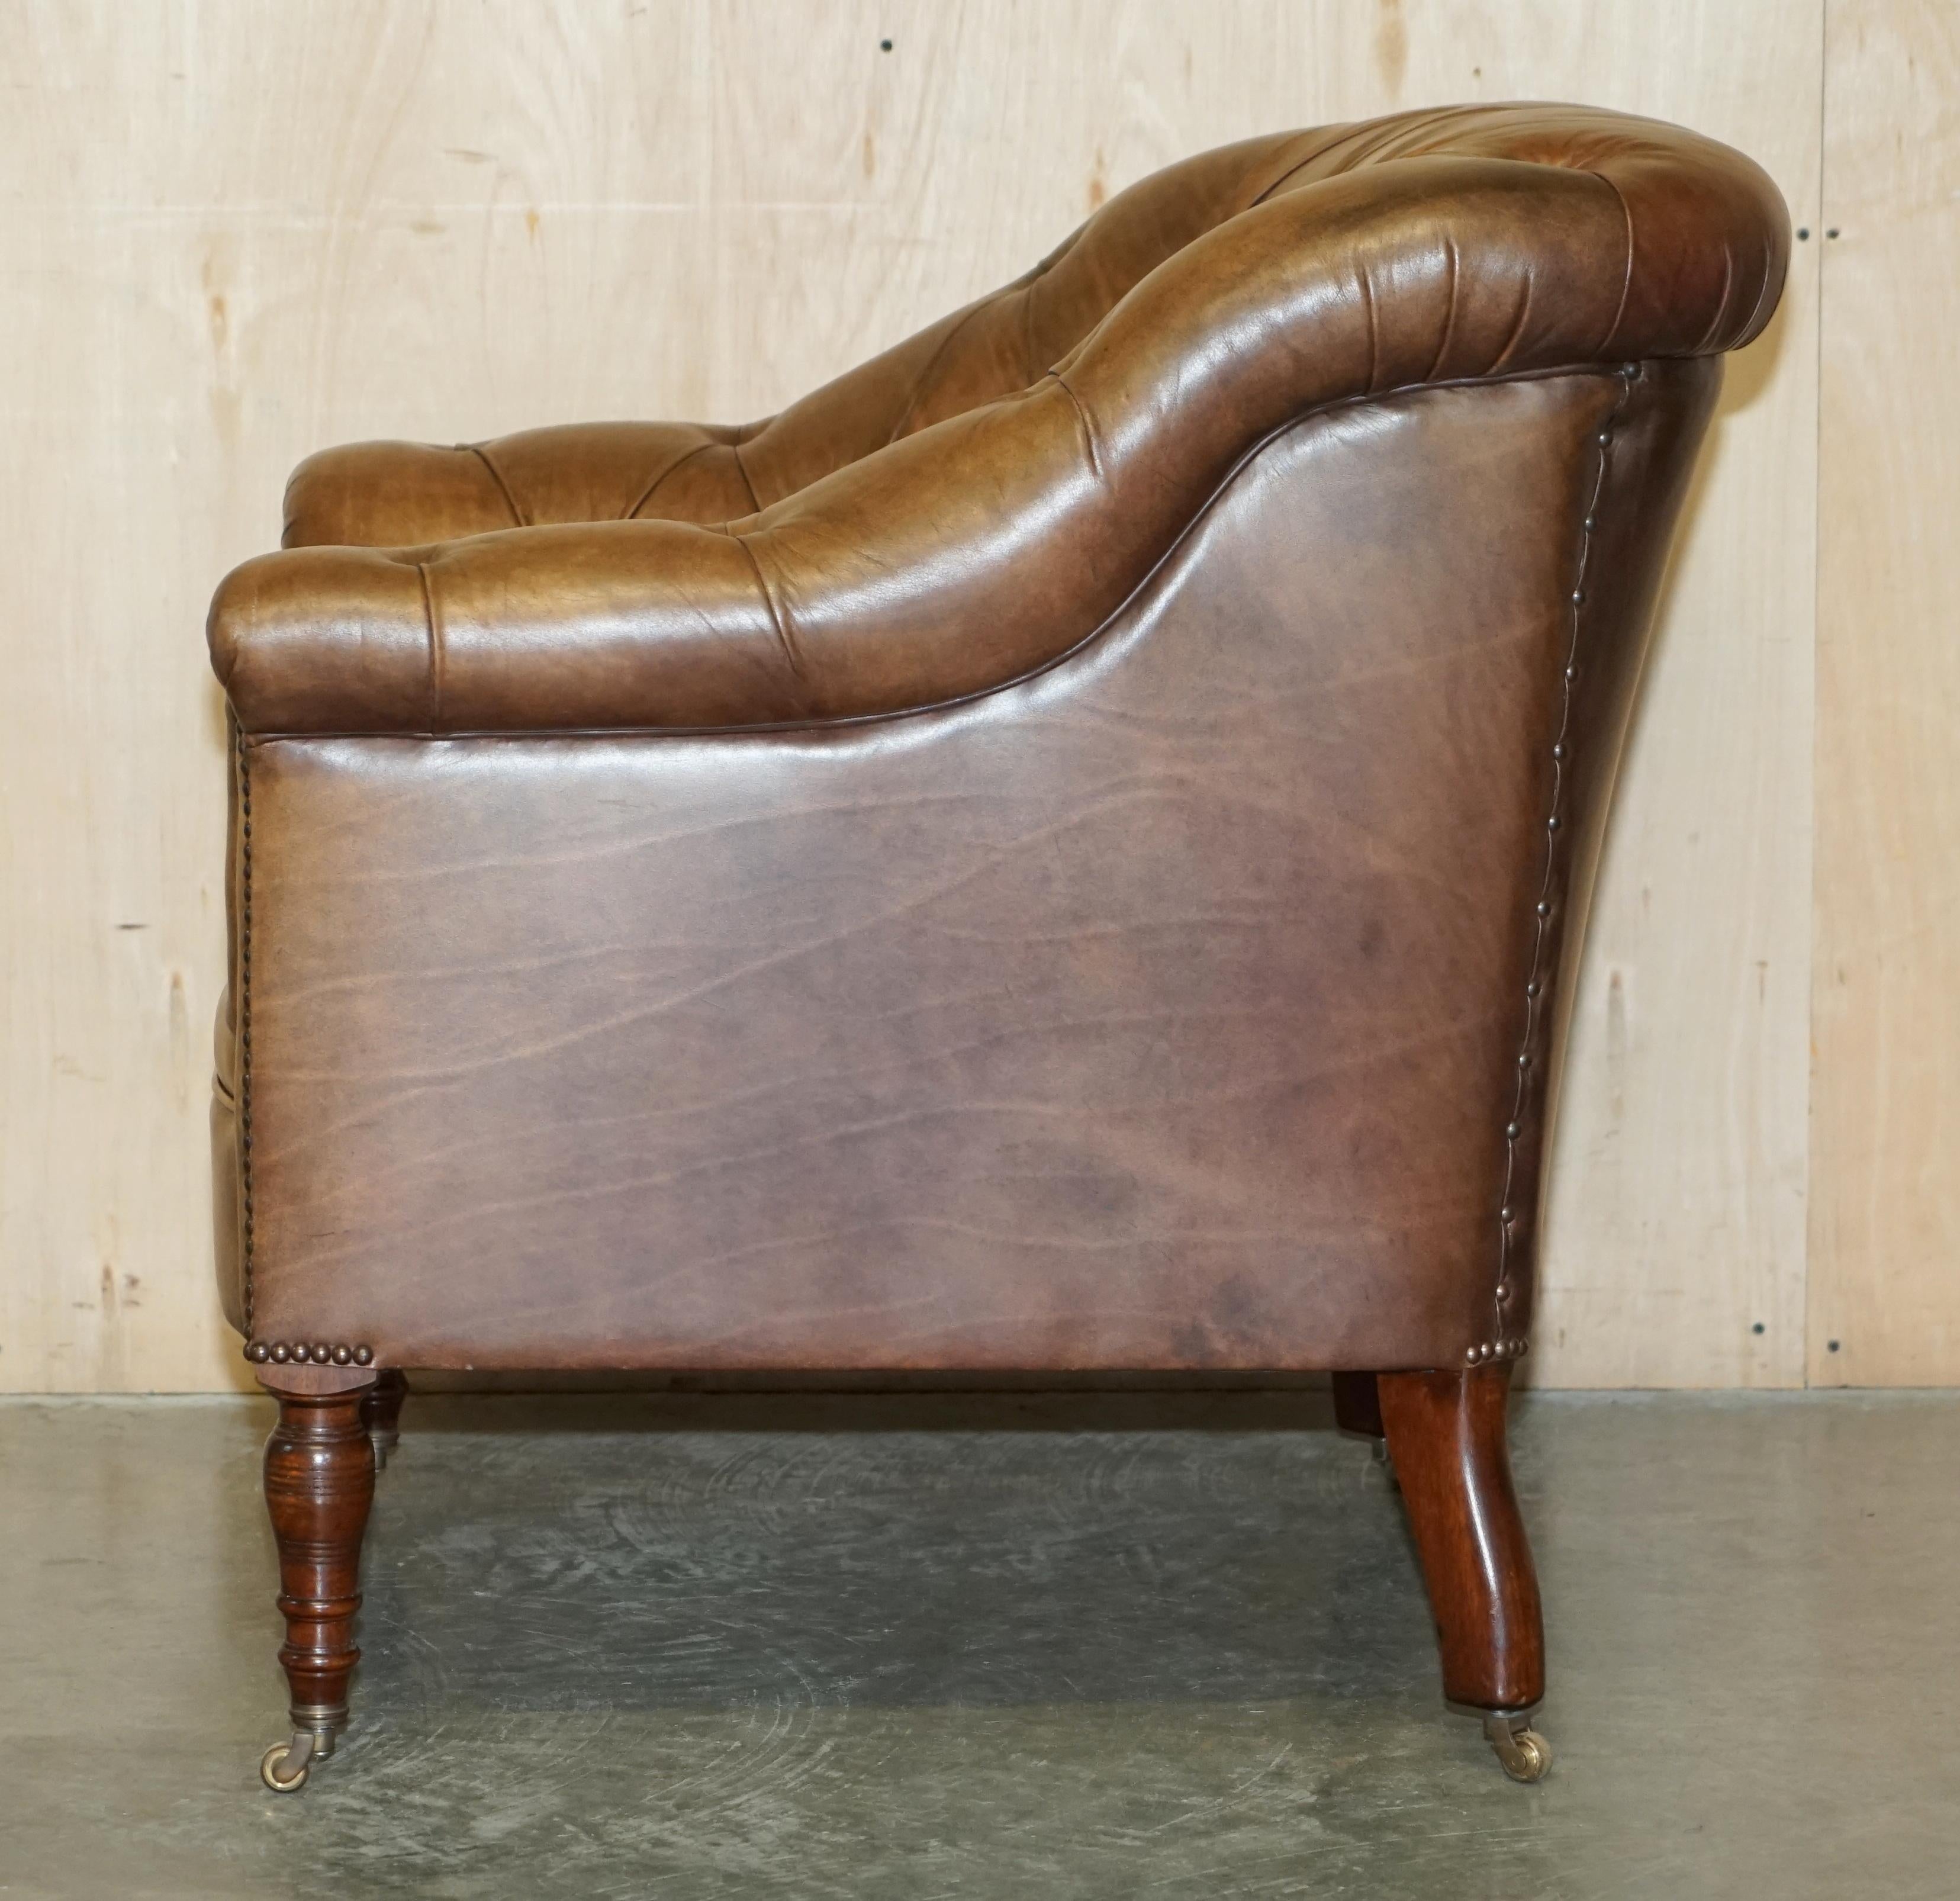  GEORGE SMiTH SOMERVILLE BROWN LEATHER CHESTERFIELD ARMCHAIR 10